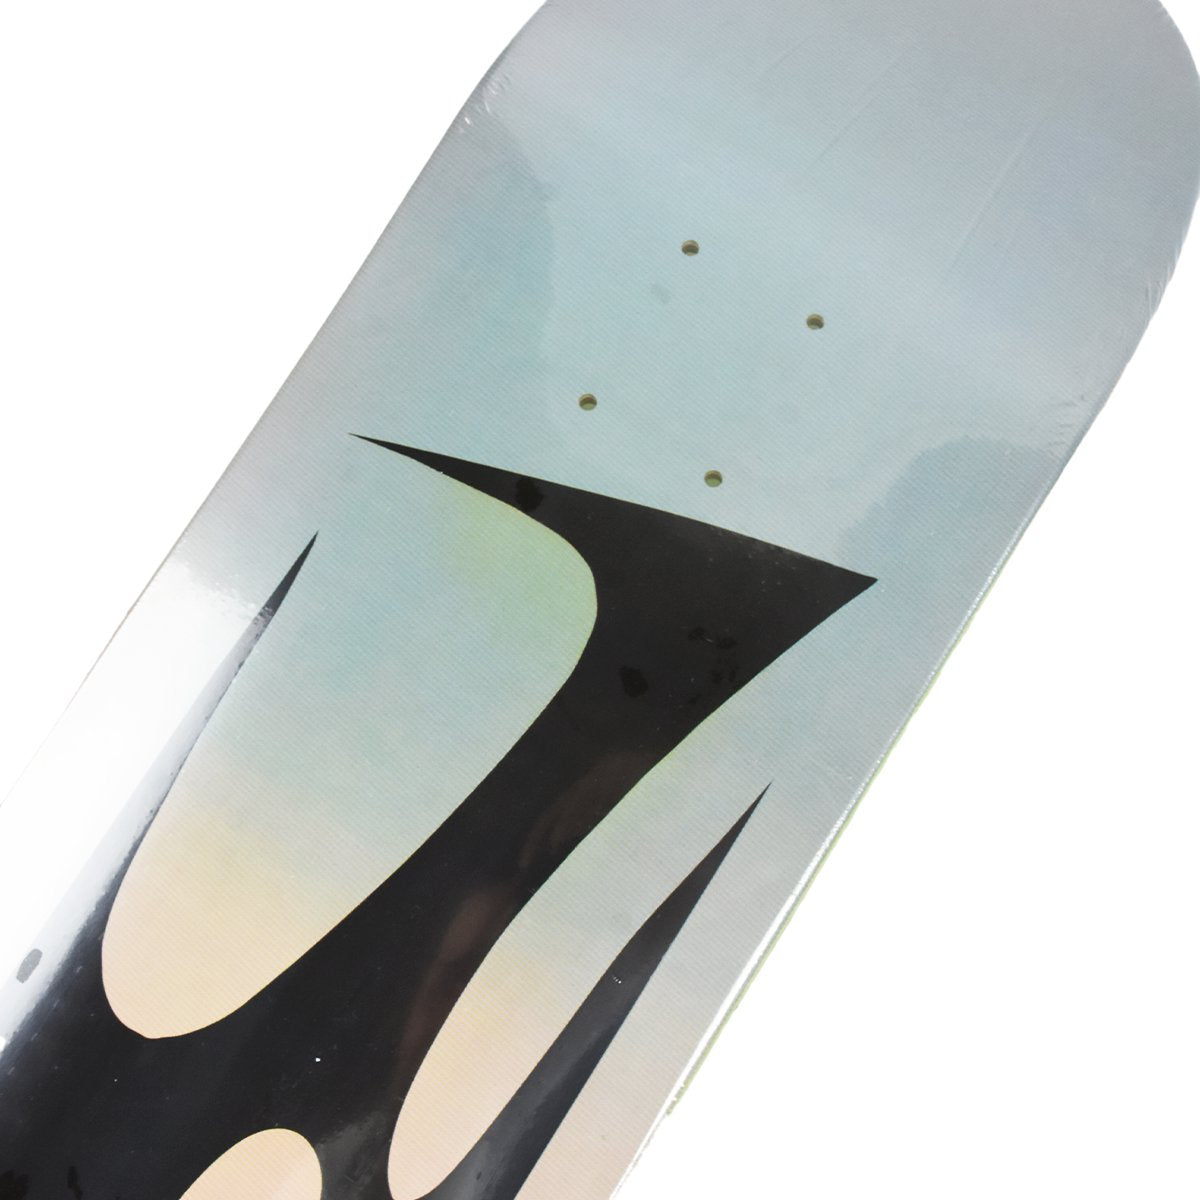 ALLTIMERS DAN CLIMAN FOR ZERED DECK SIZE VERIANT